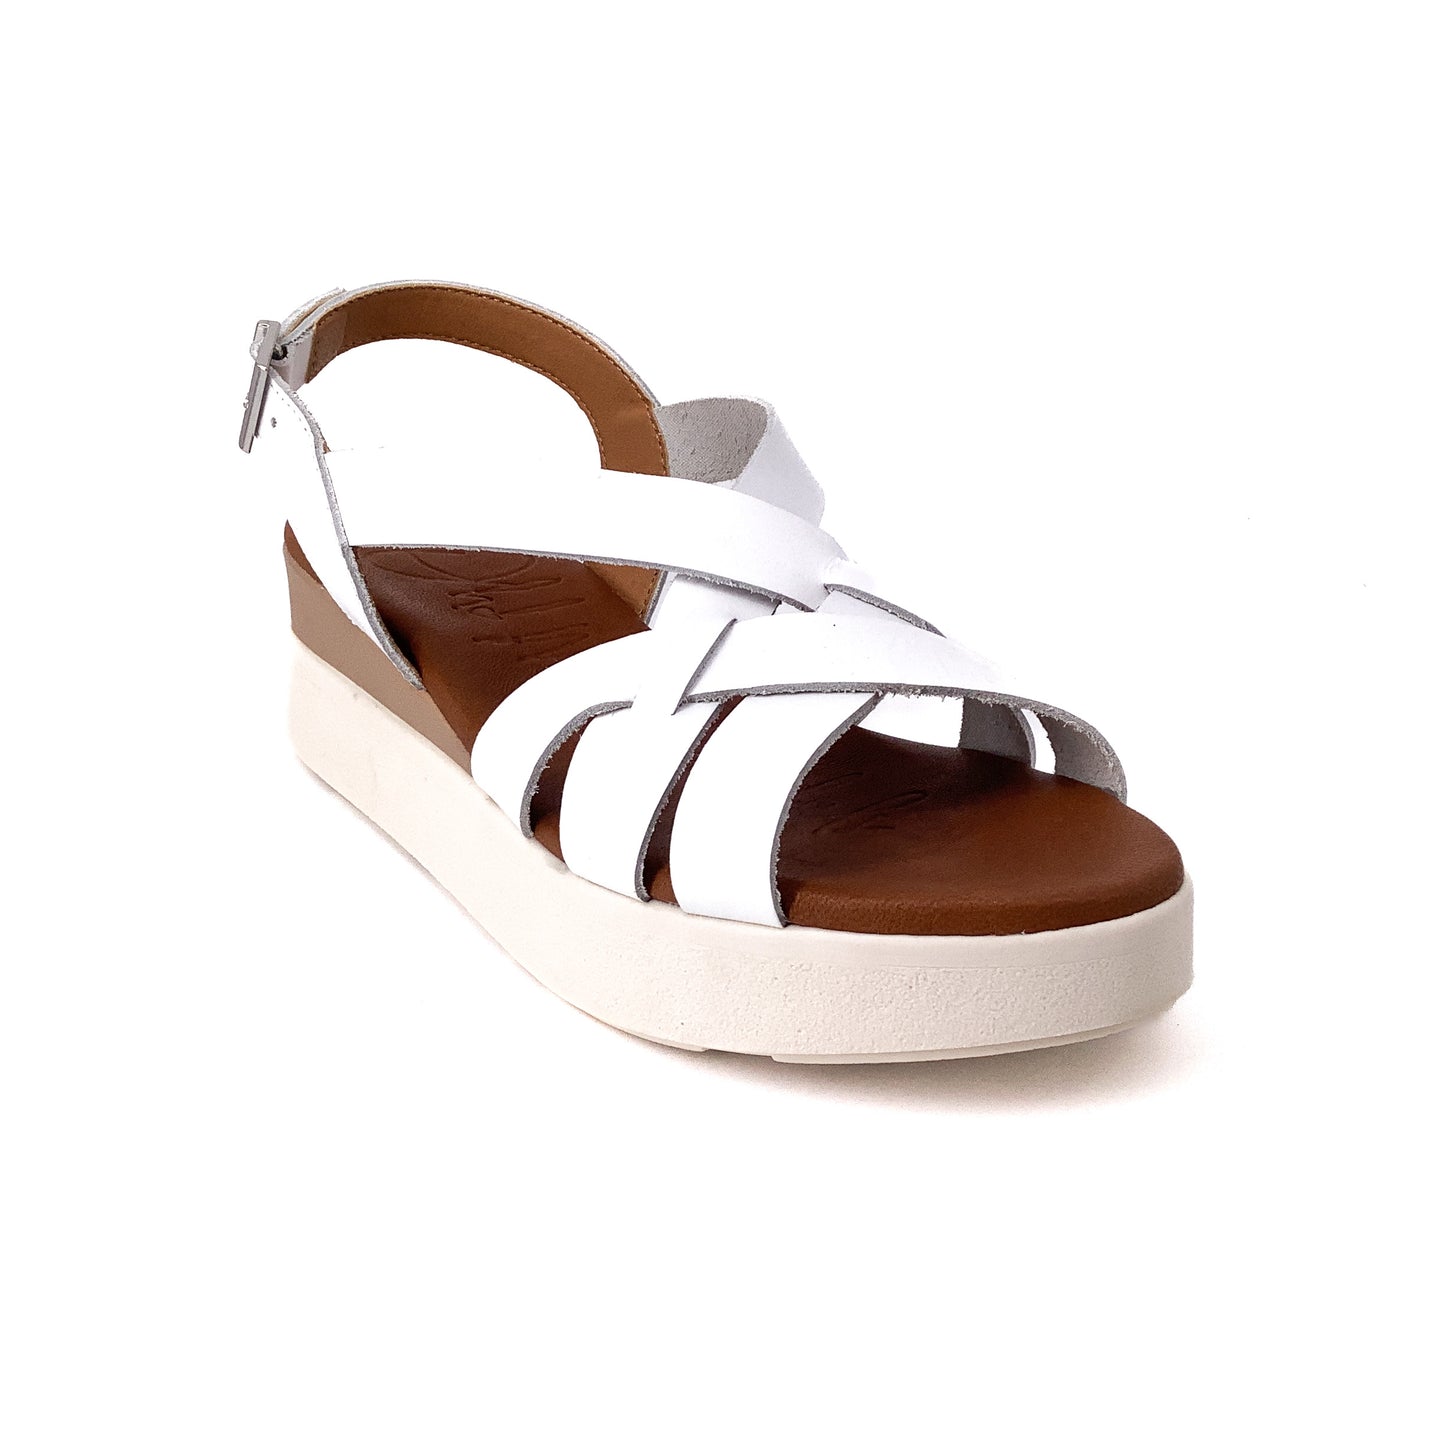 Oh My Sandals! 5188 Blanco